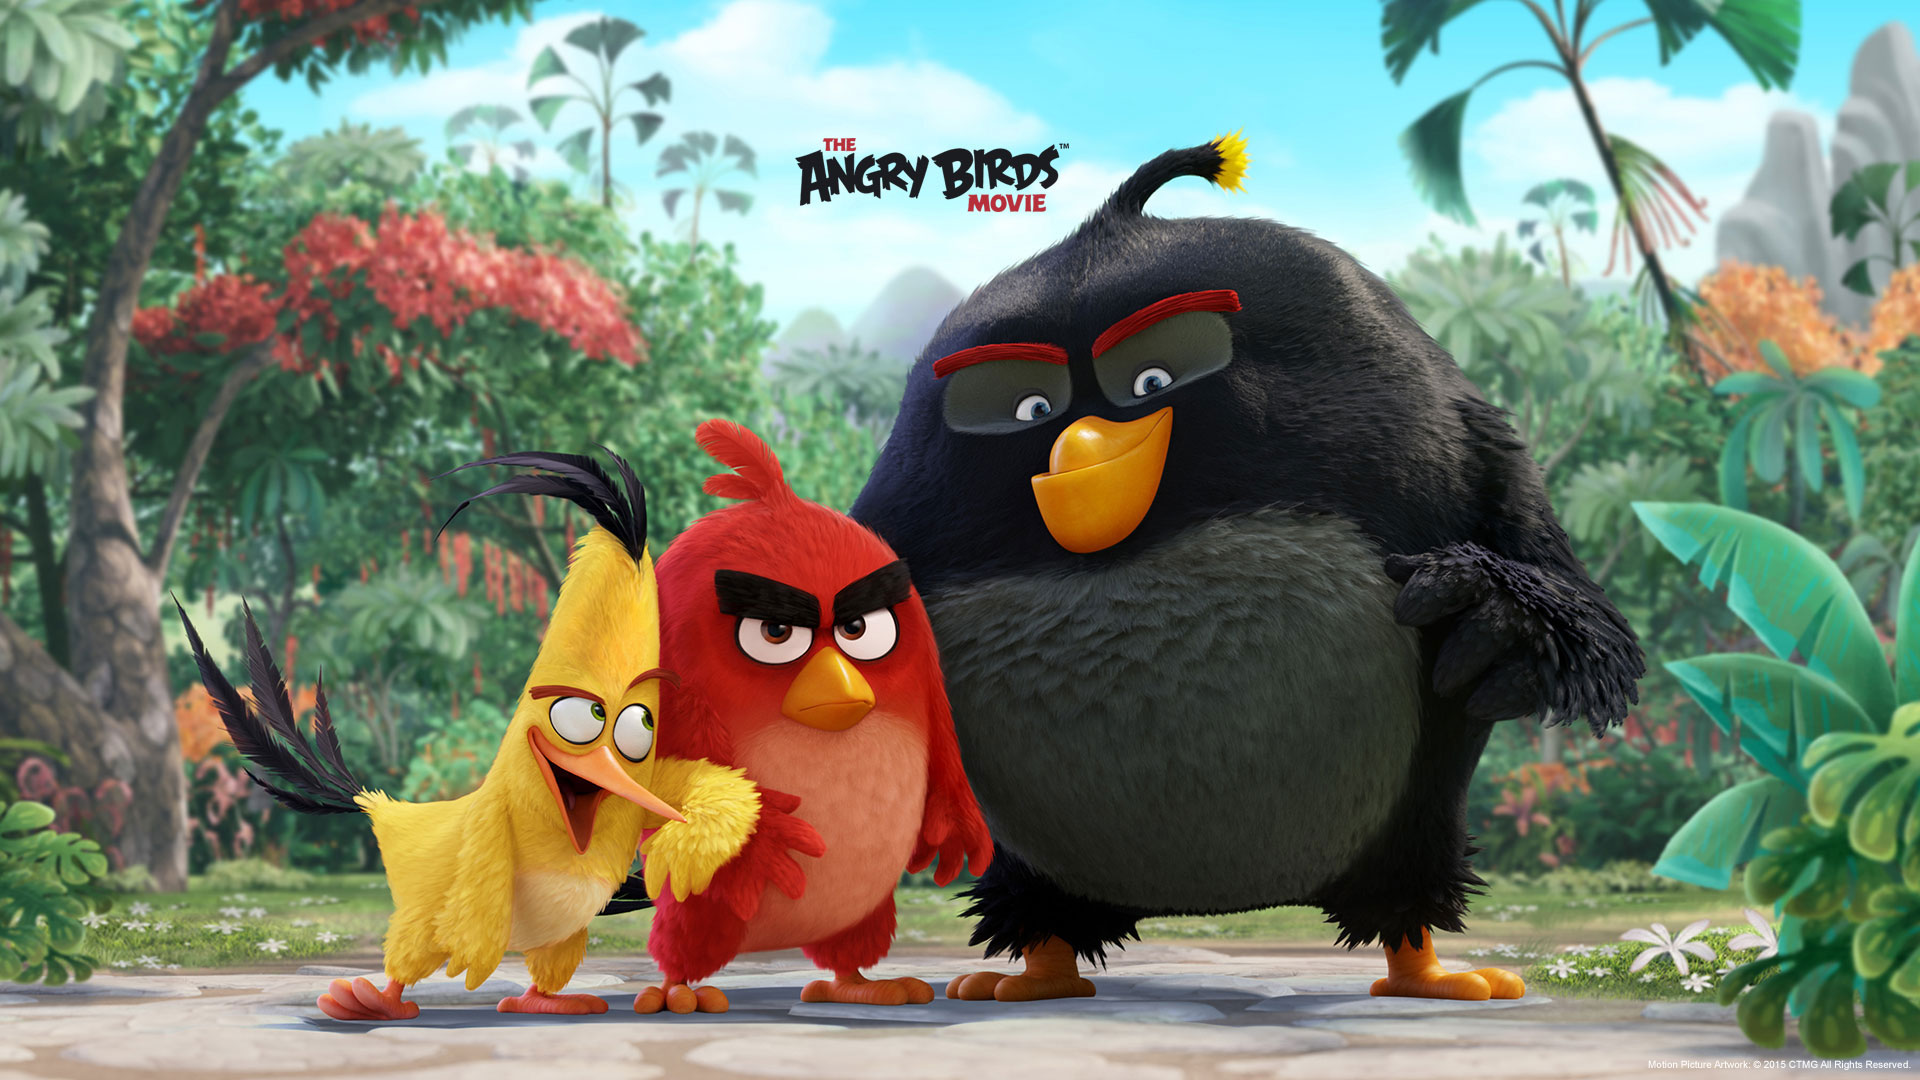 Hd wallpapers of angry birds